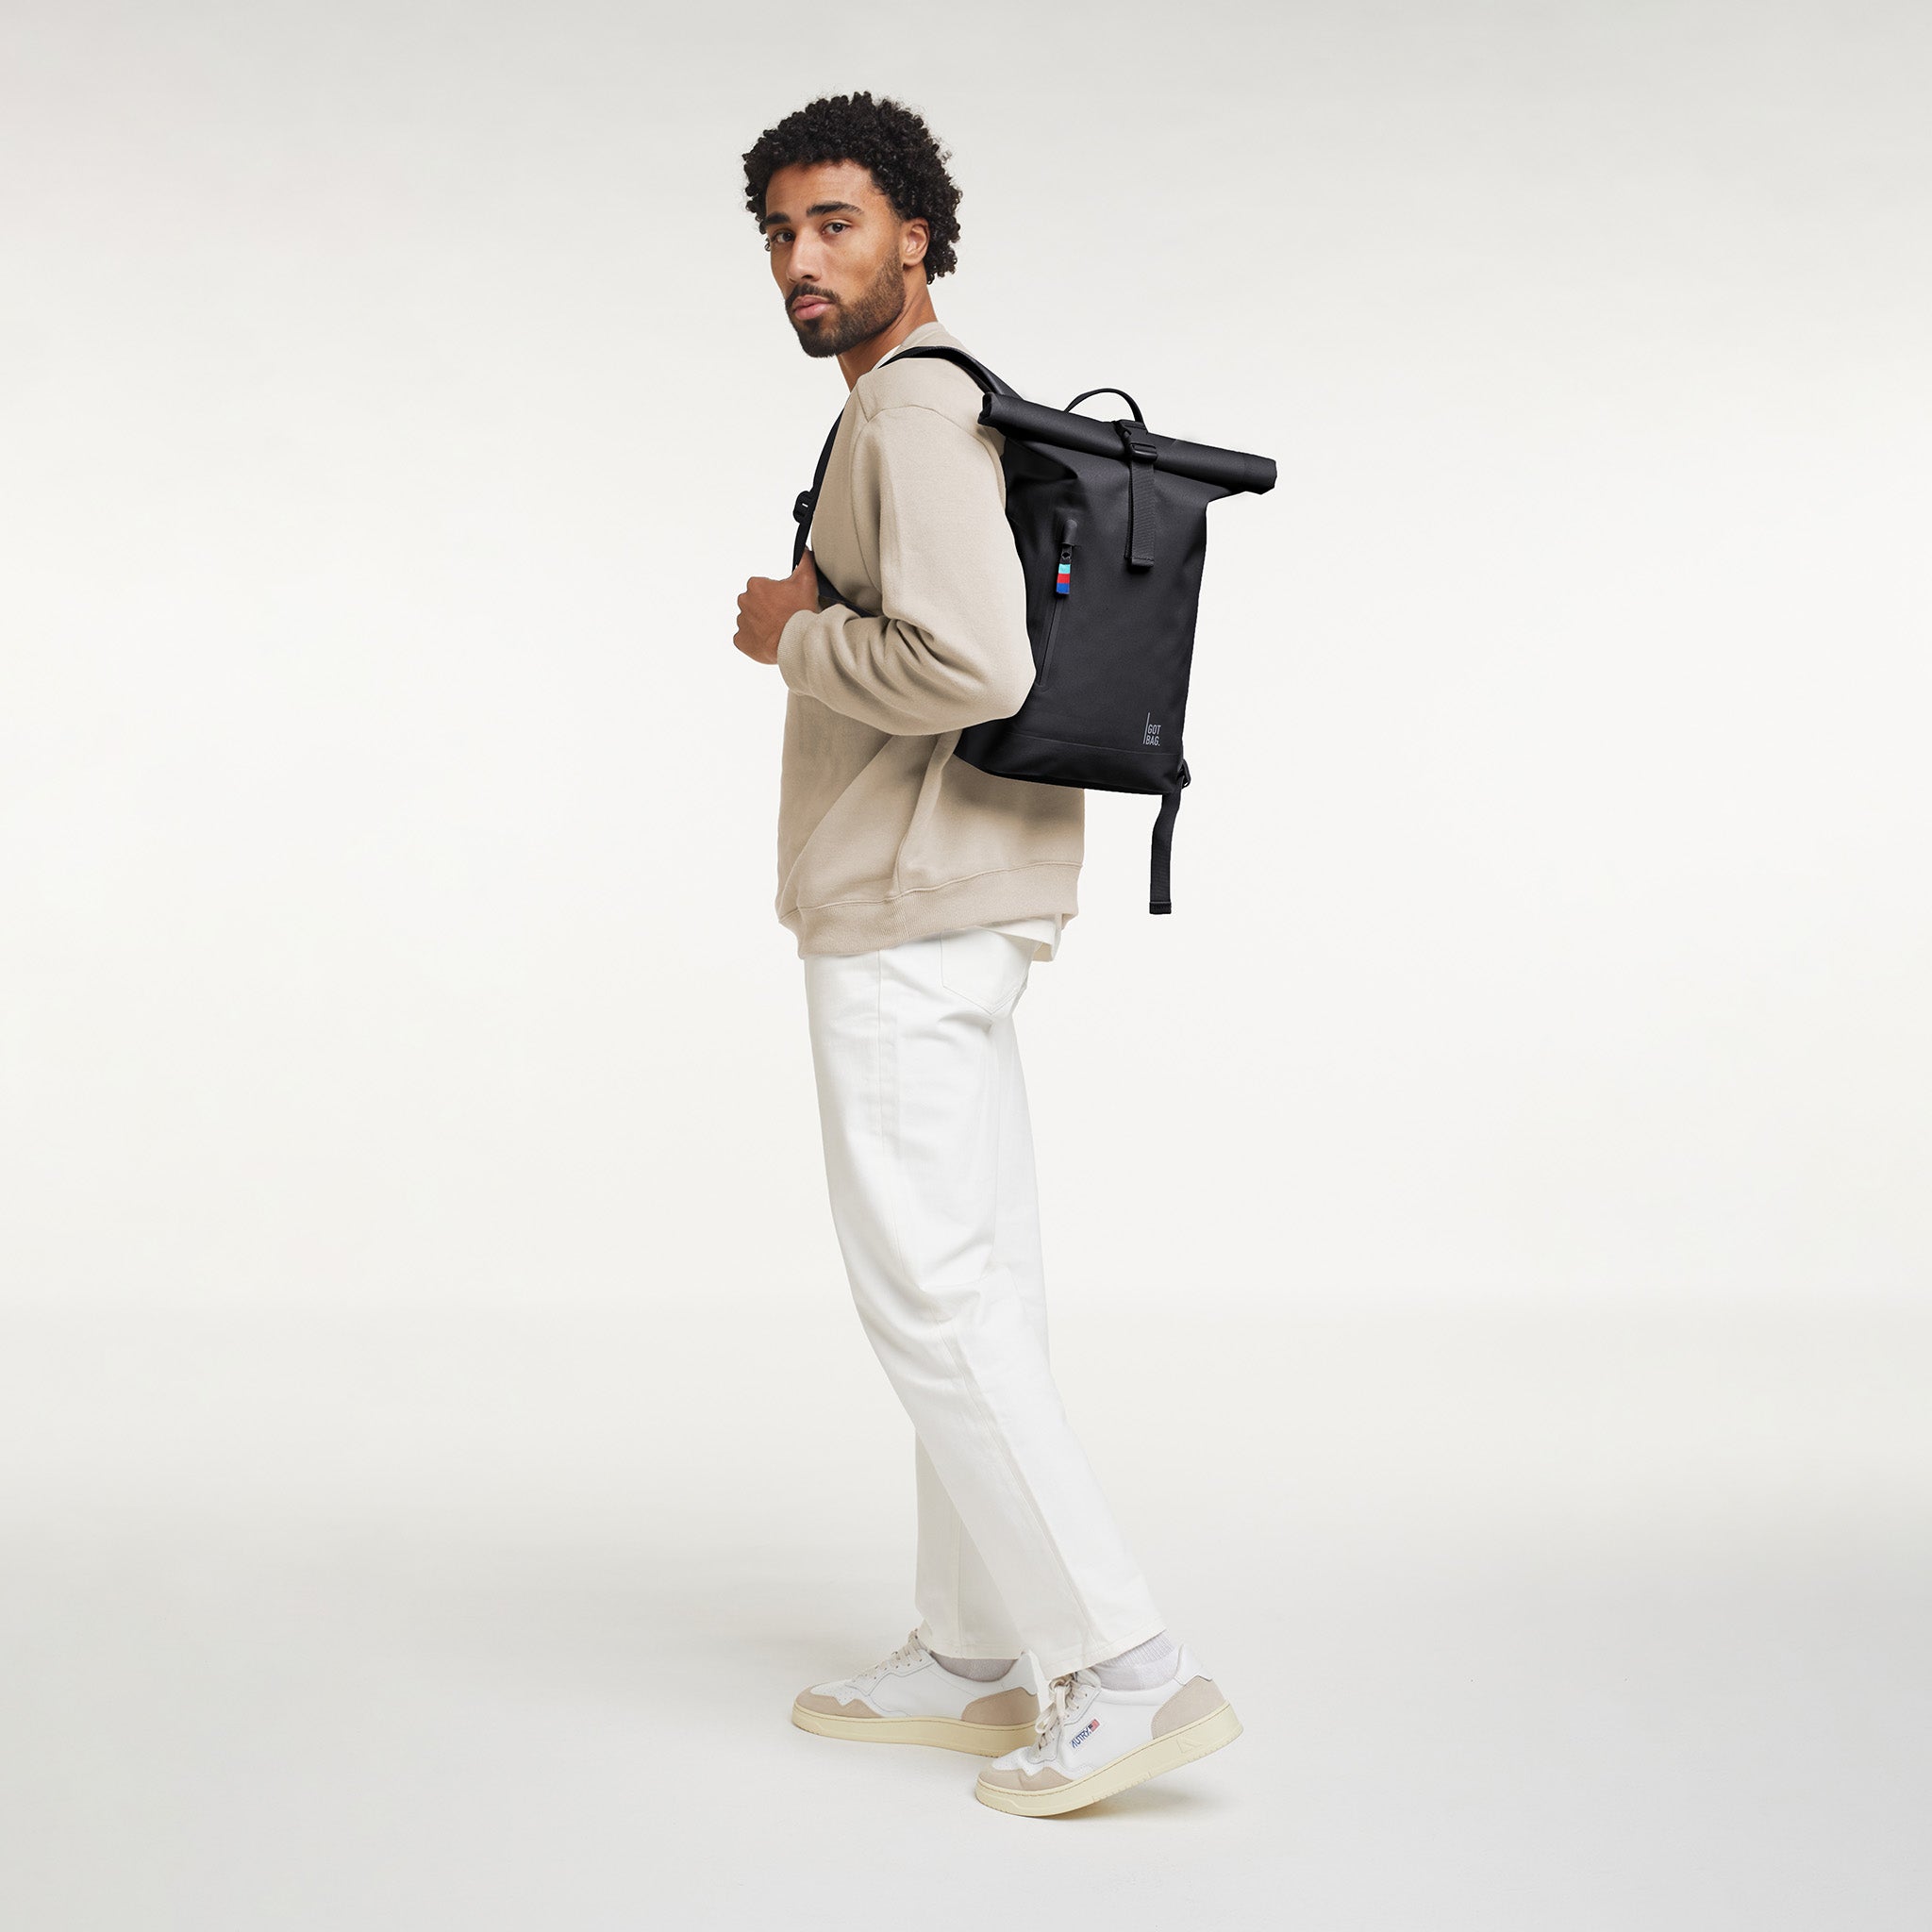 GOT BAG - World's first backpack made of recycled ocean plastic